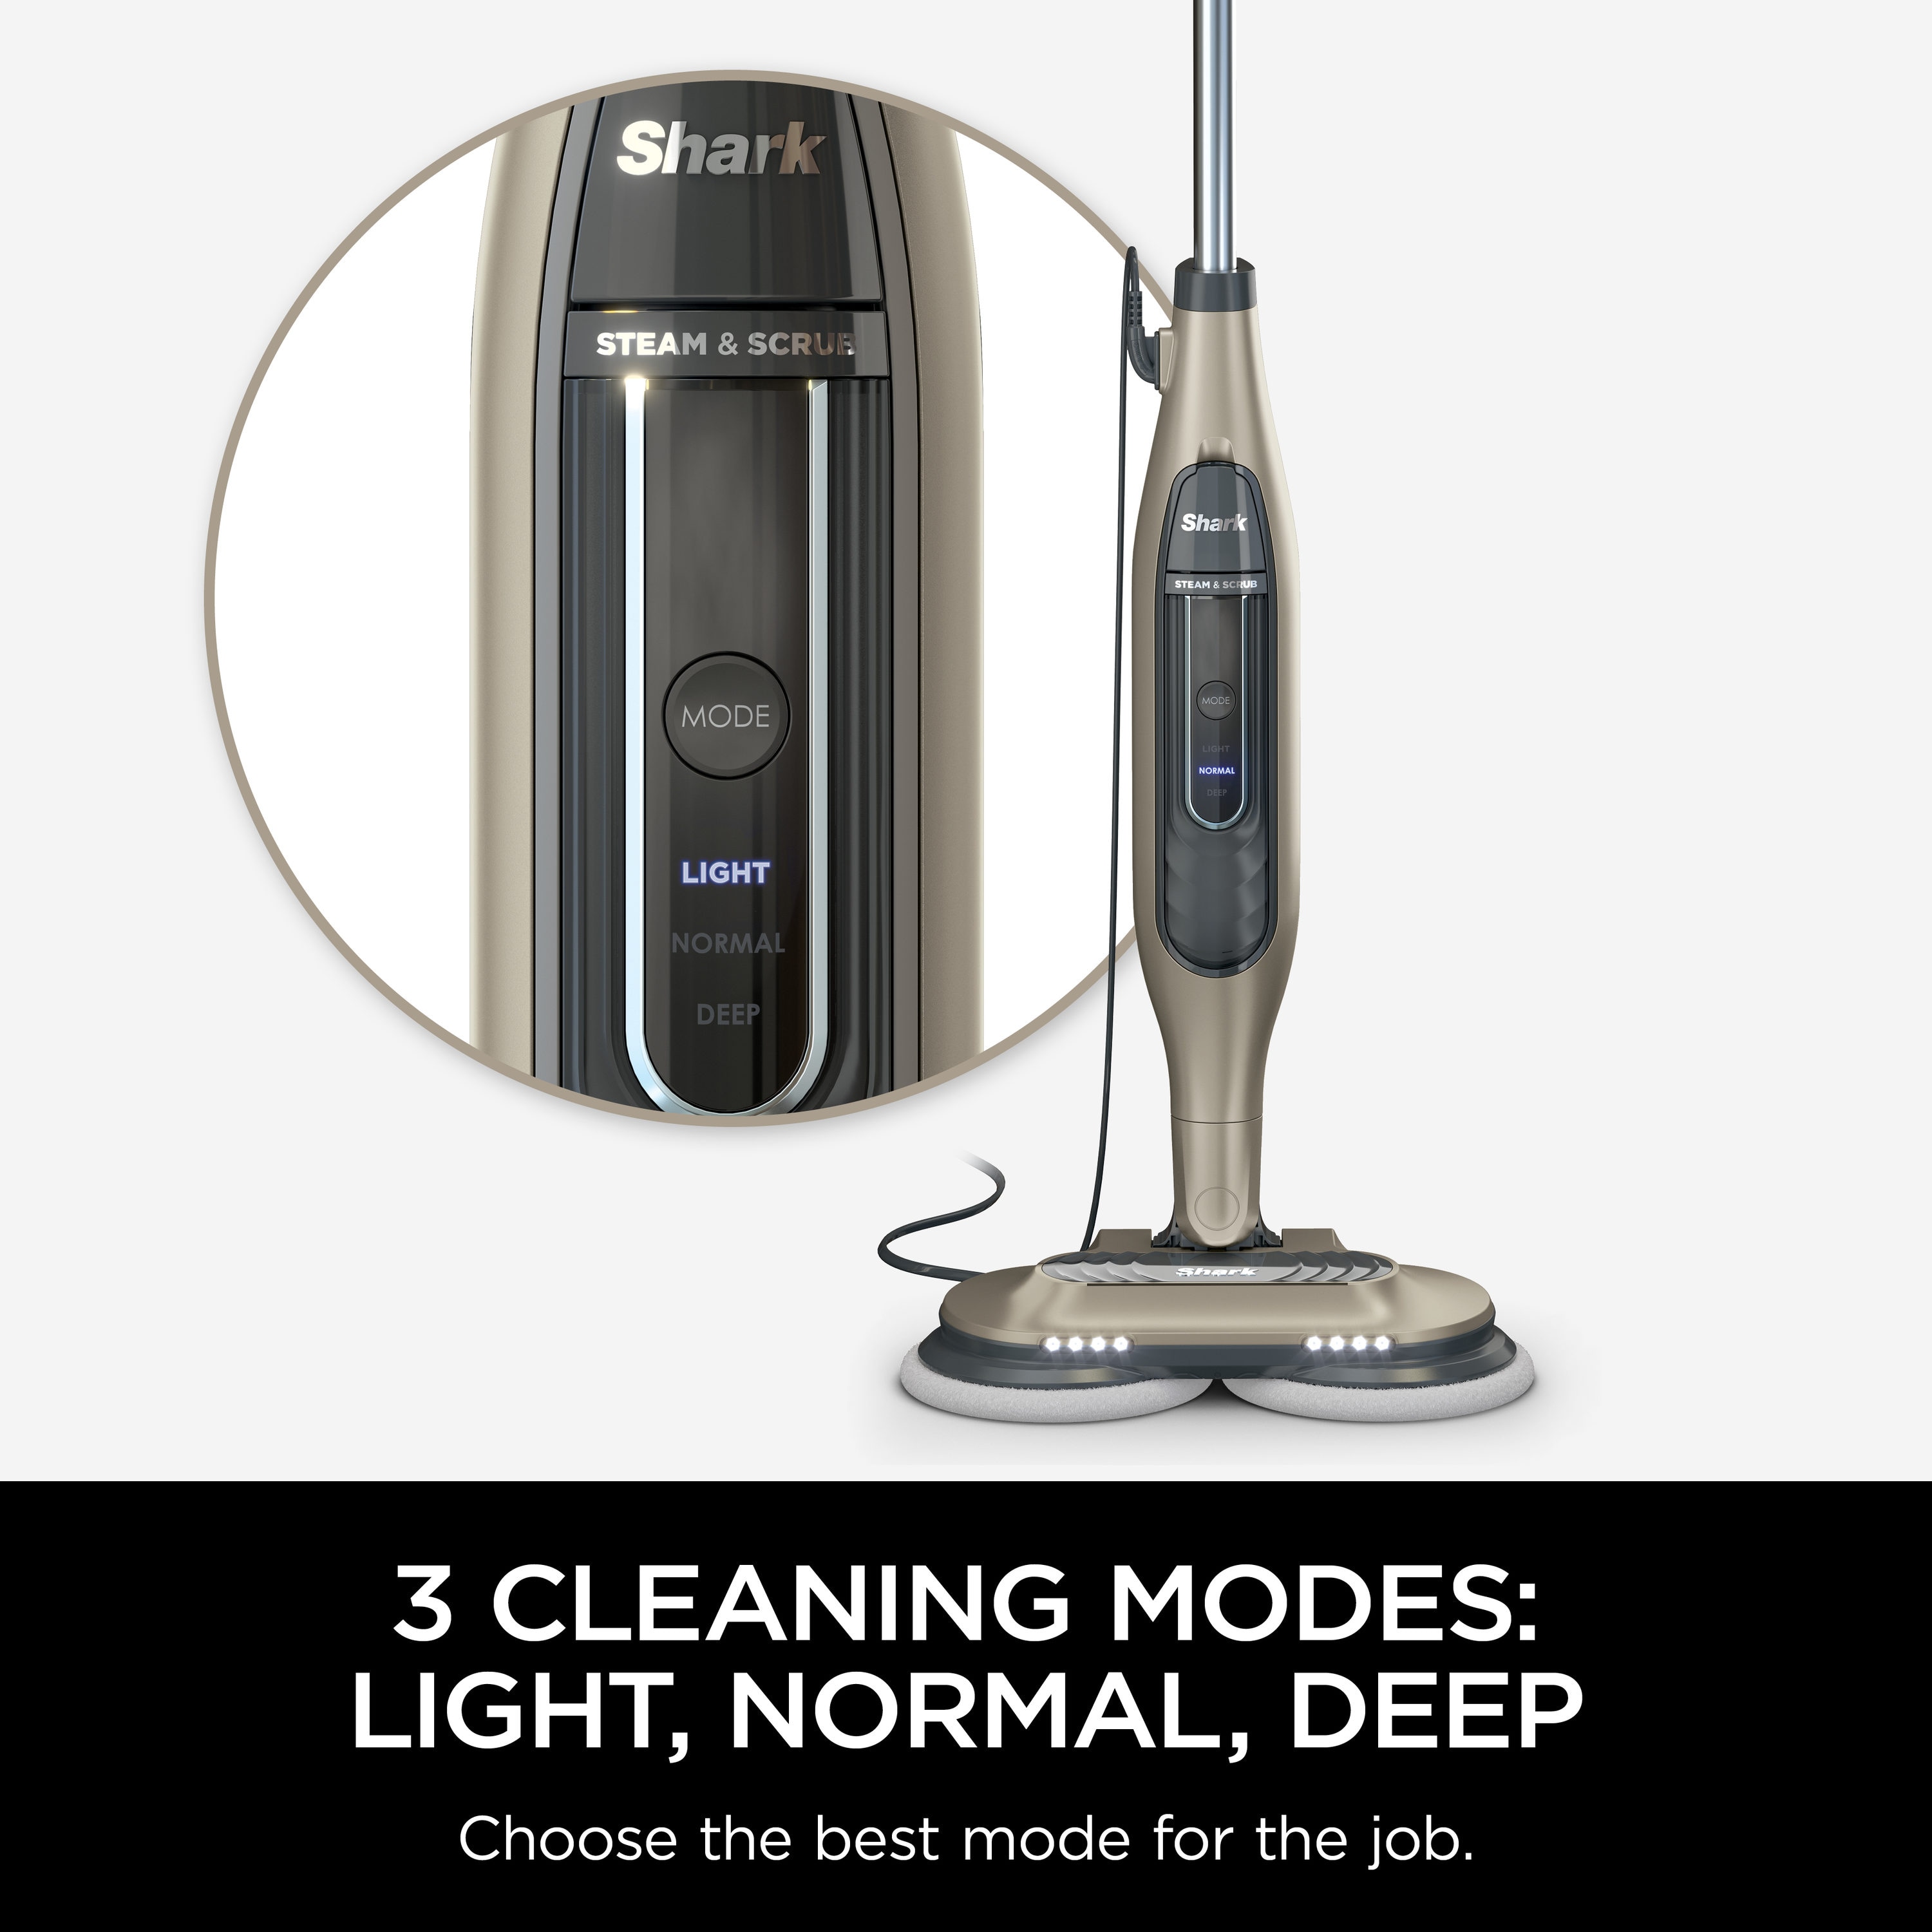  Shark S7001 Mop, Scrub & Sanitize at The Same Time, Designed  for Hard Floors, with 4 Dirt Grip Soft Scrub Washable Pads, 3 Steam Modes &  LED Headlights, Gold, 13.7 in